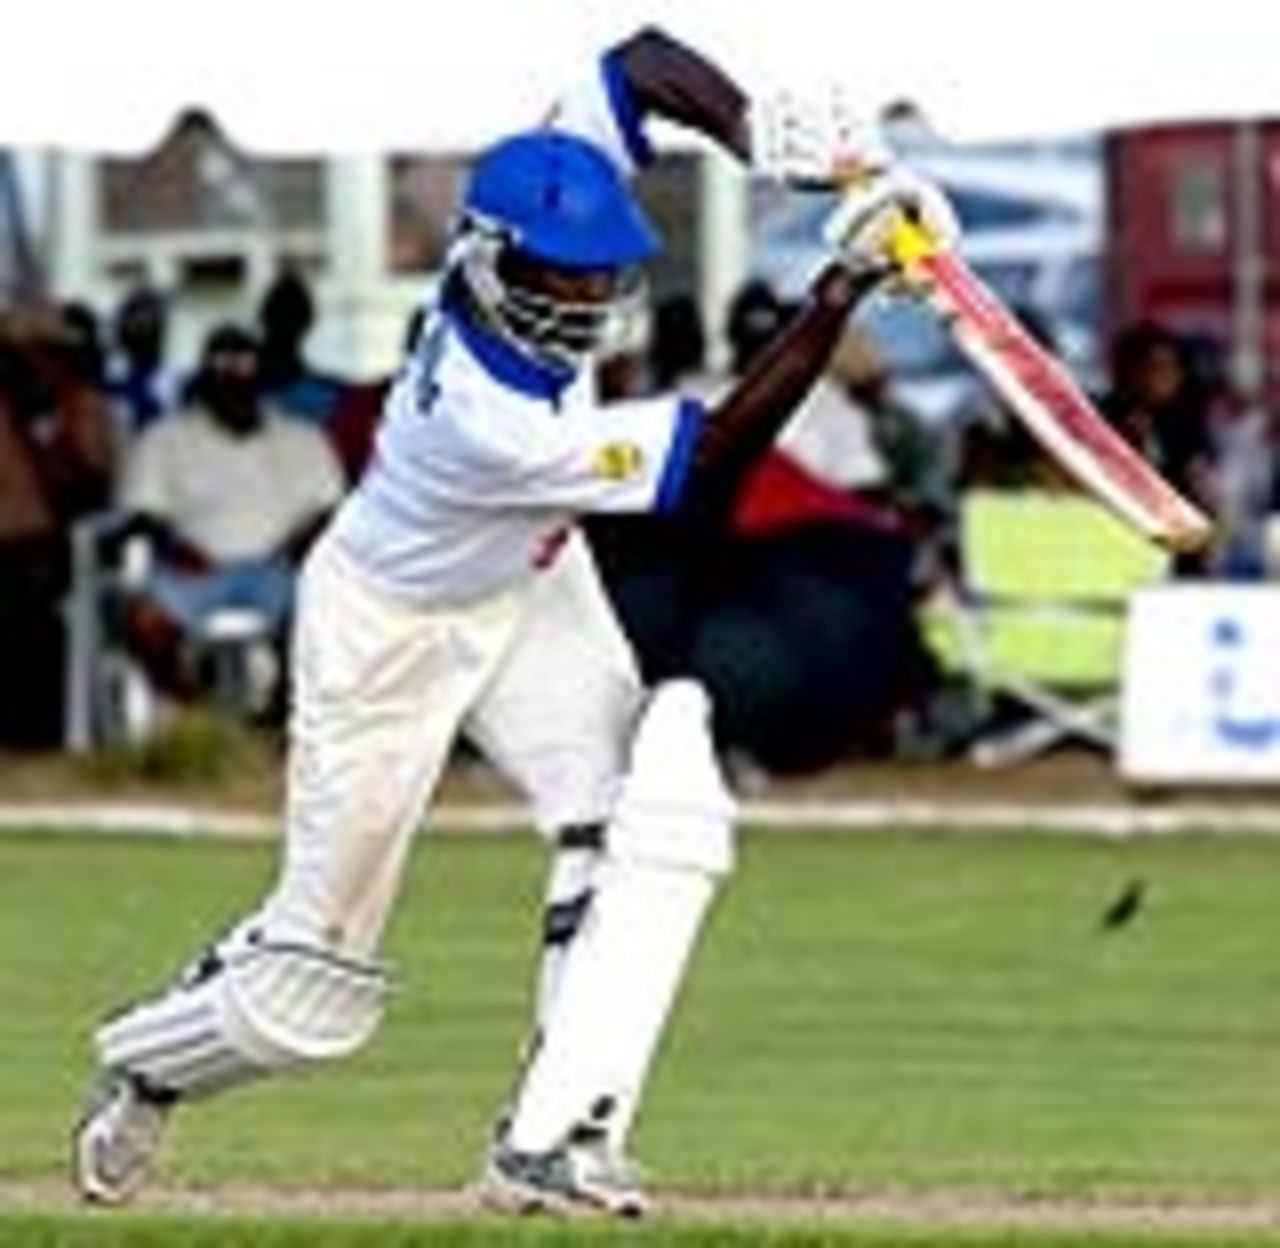 Dale Richards drives during his 159, Jamaica v Barbados, Carib Beer Series, Chedwin Park, 2nd day, January 29, 2007